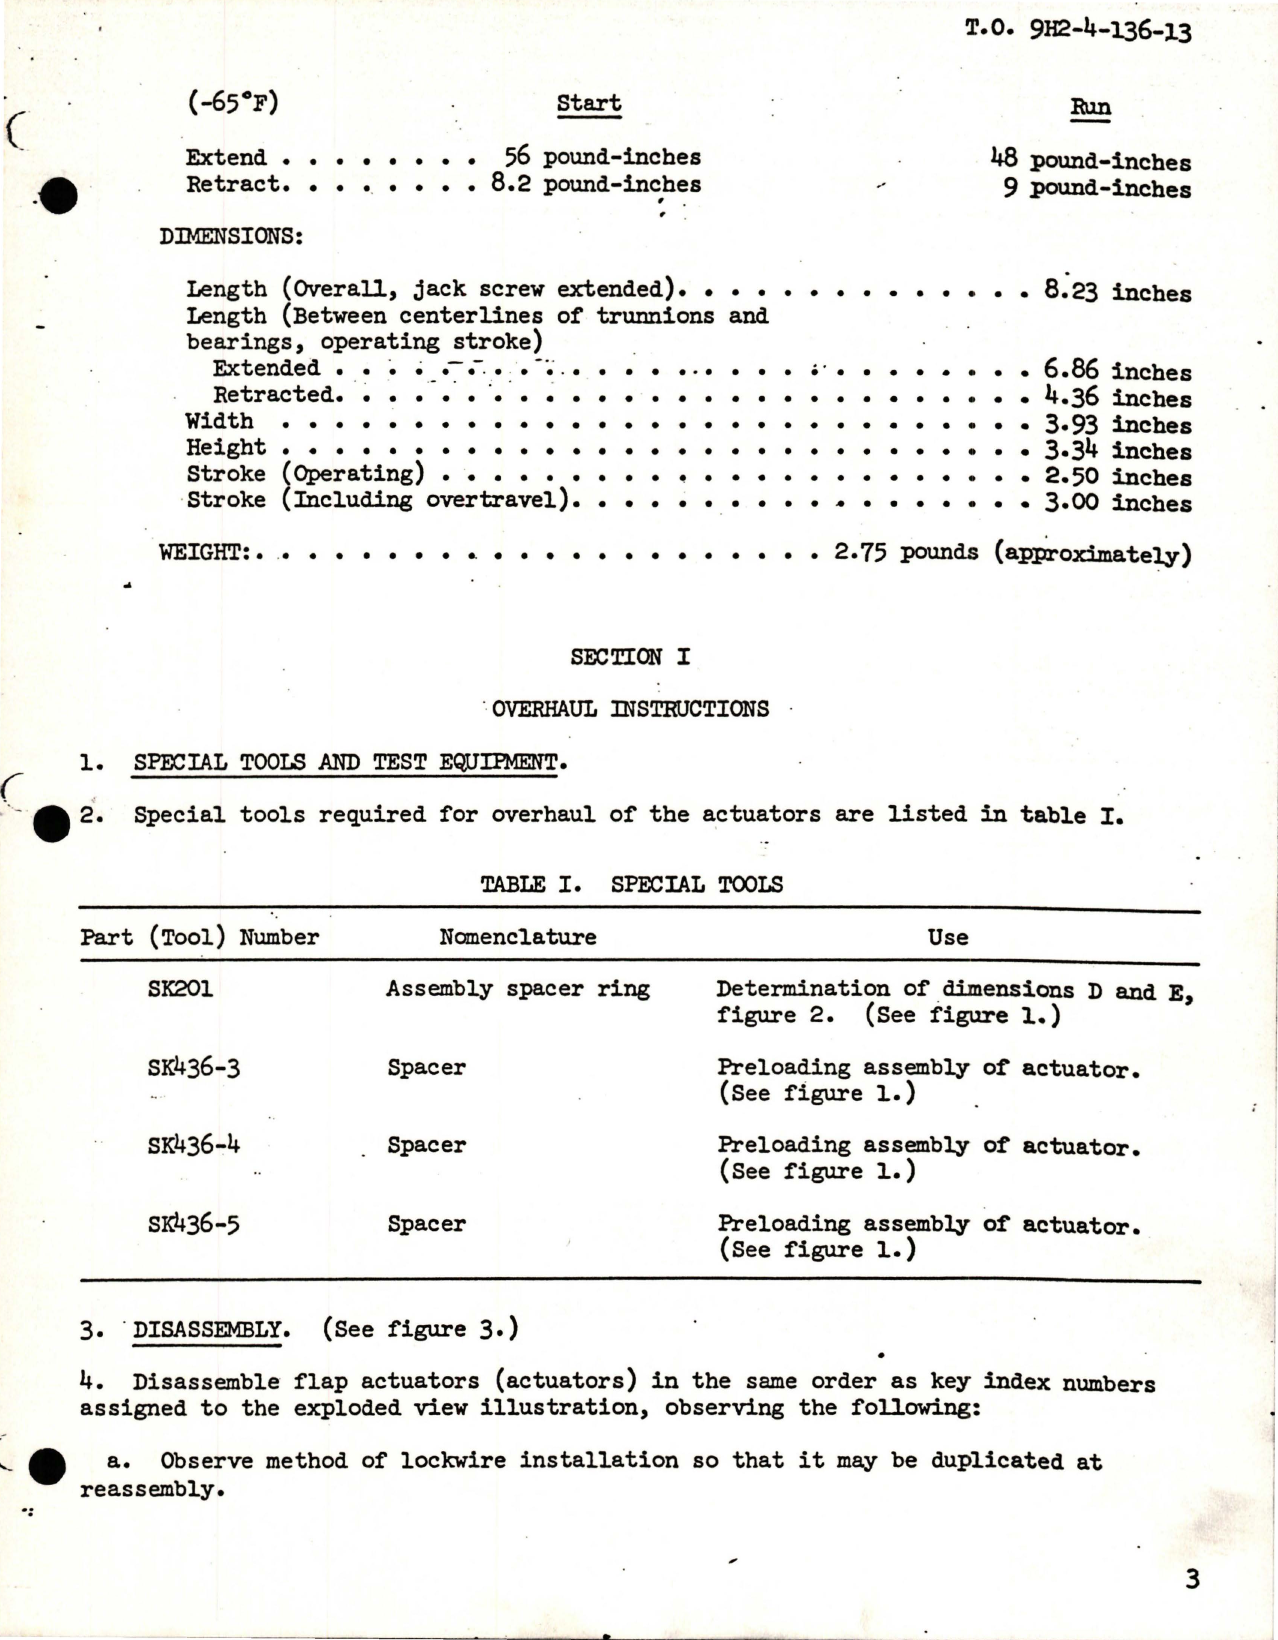 Sample page 5 from AirCorps Library document: Overhaul with Illustrated Parts Breakdown for Flap Actuators 